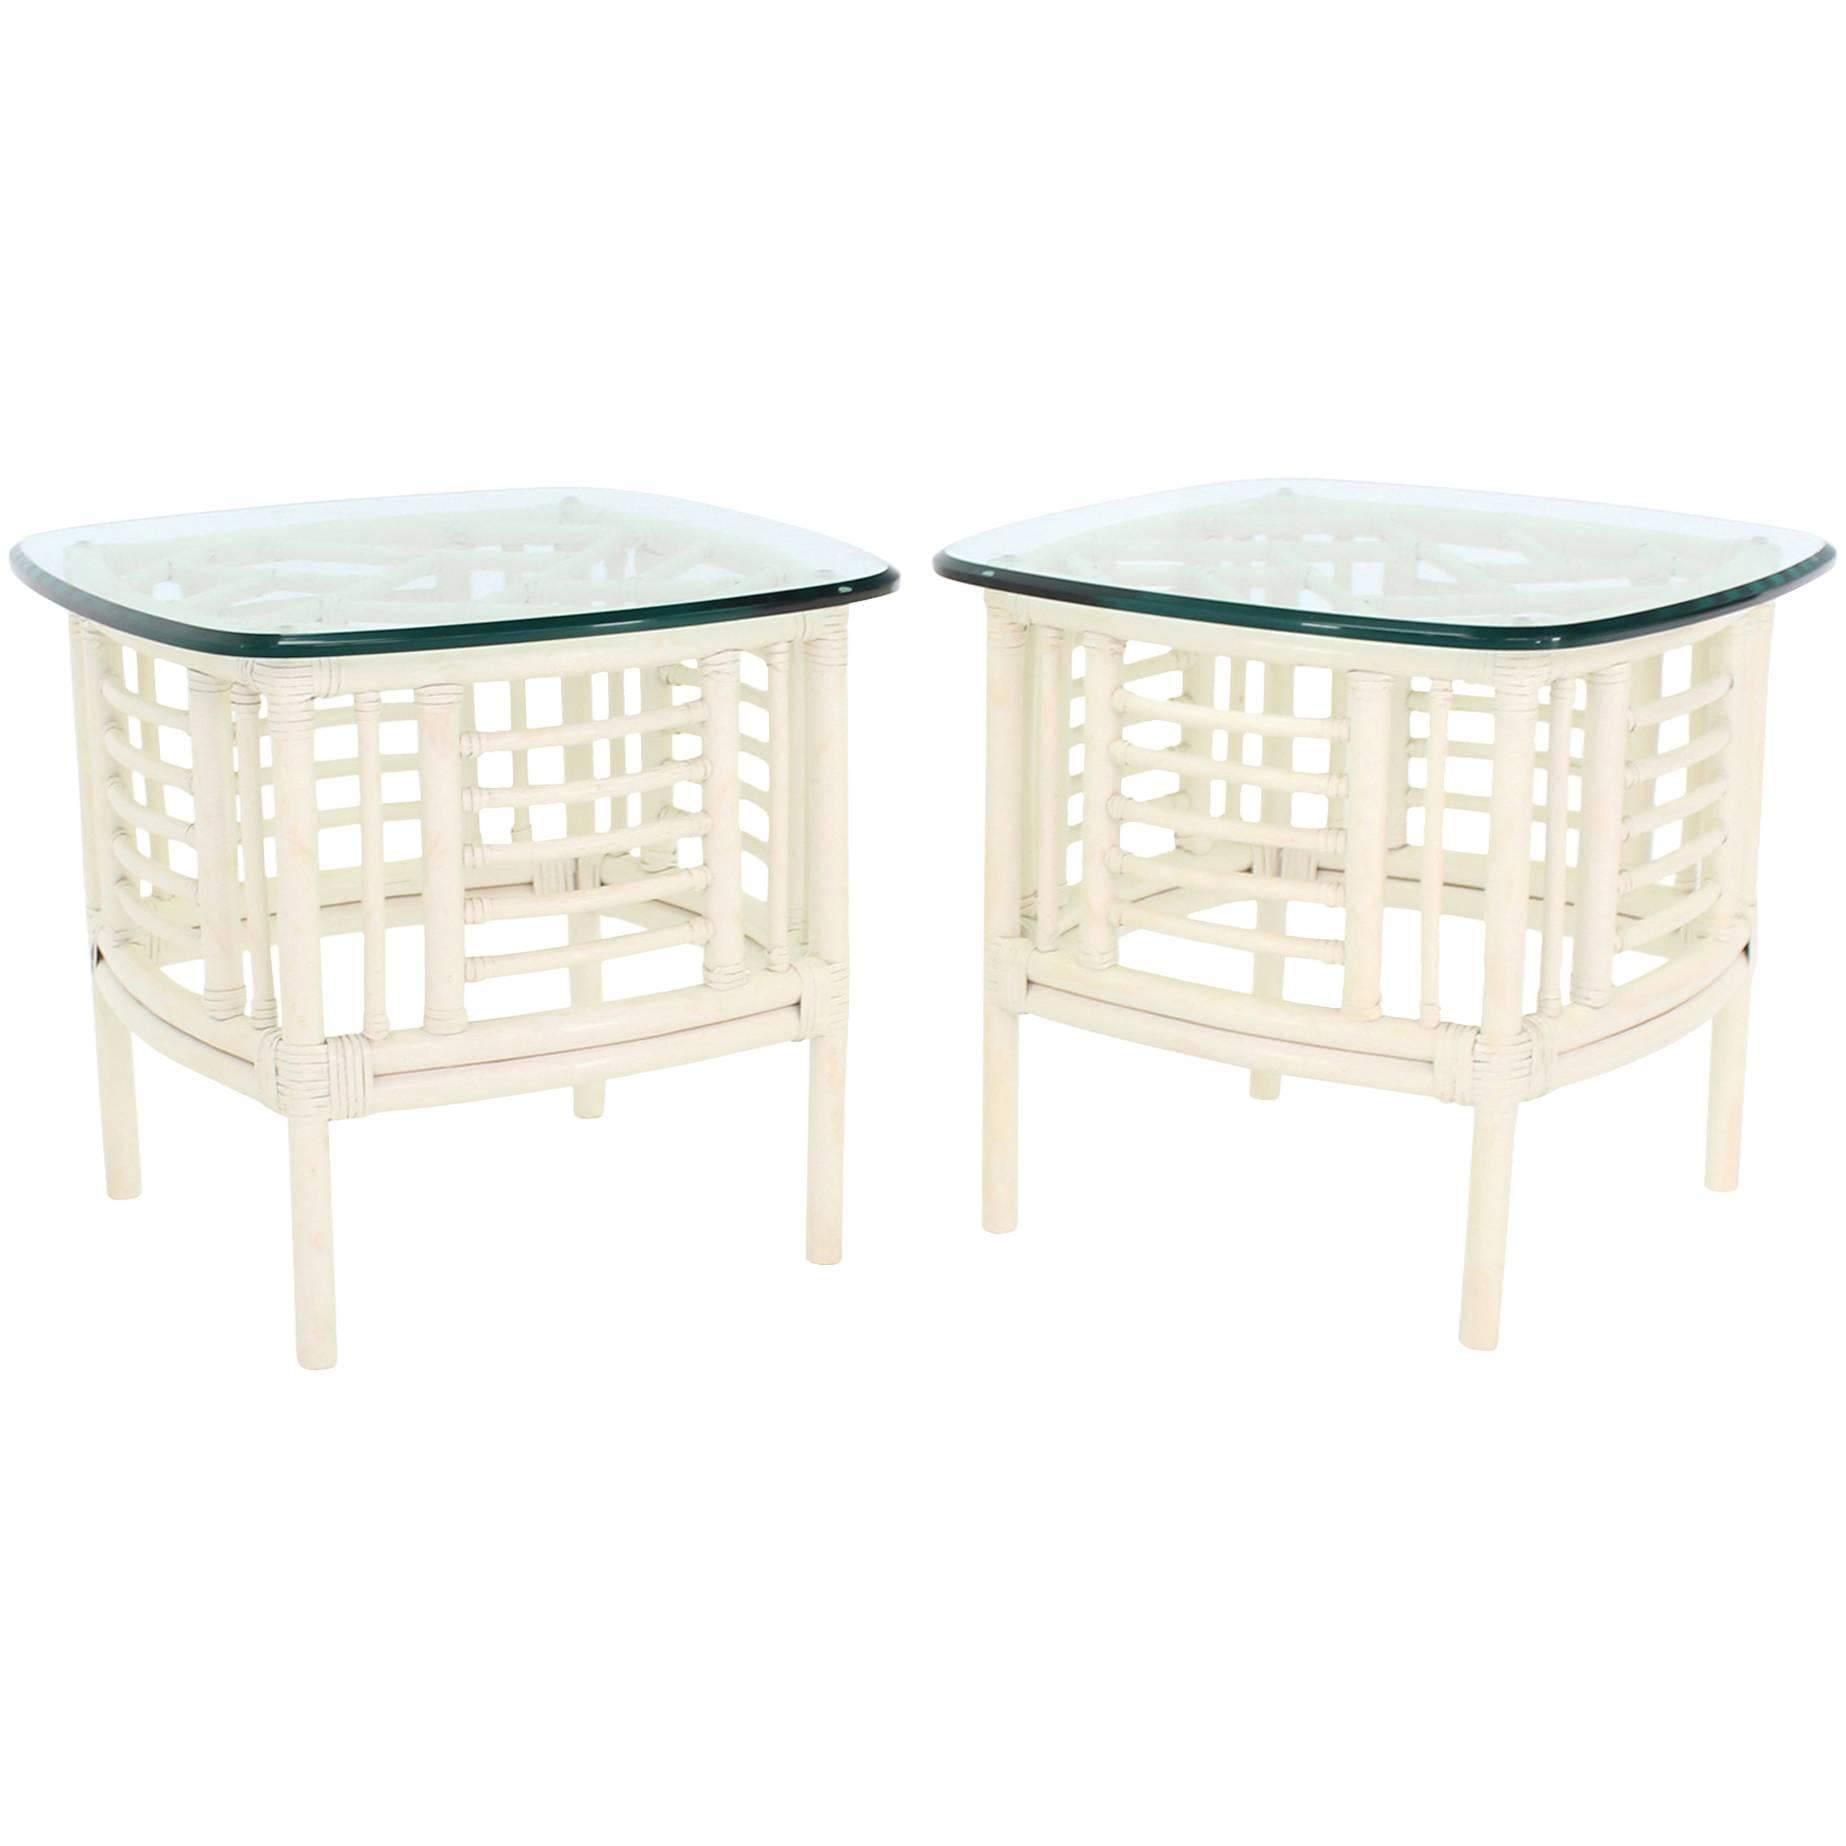 Pair of White Rattan Glass Top Mid-Century Modern Side Tables For Sale